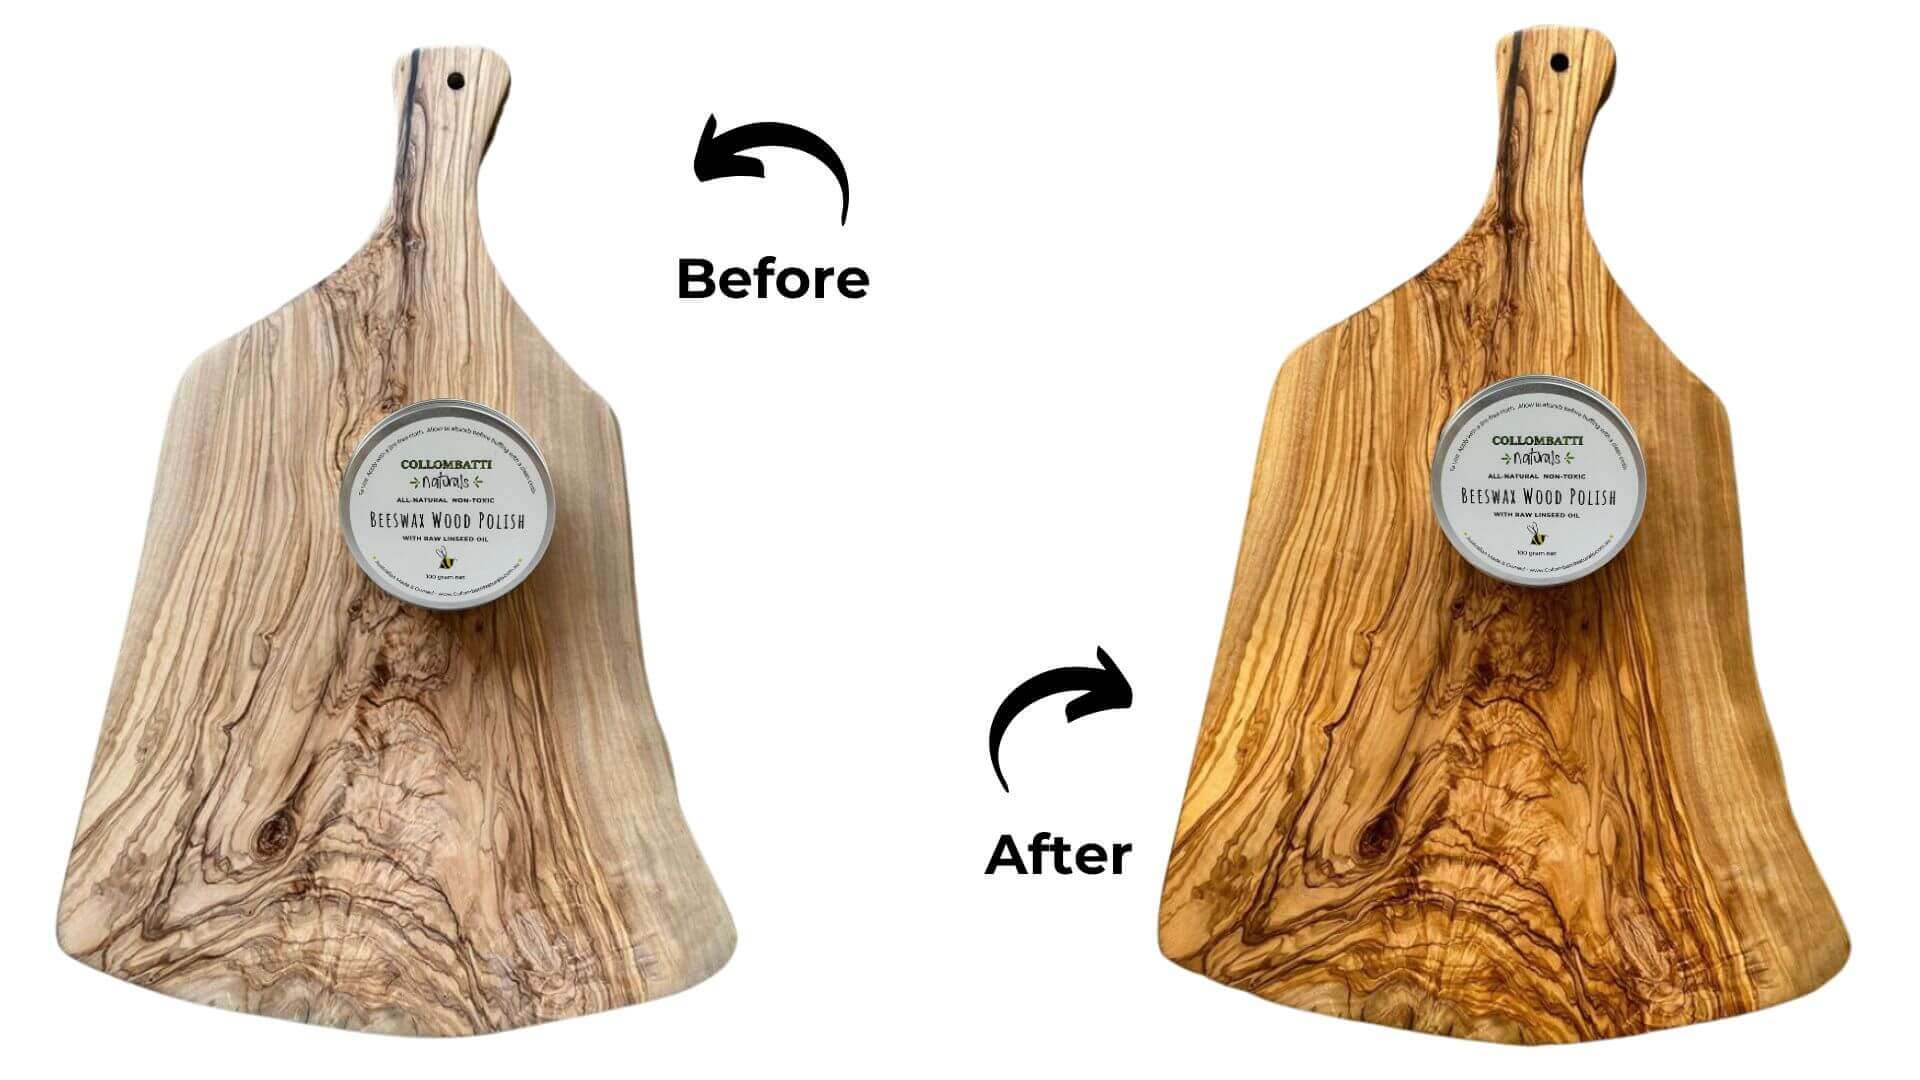 Collombatti Naturals 5 Reasons to use a beeswax wood polish picture of a cutting board before and after polishing